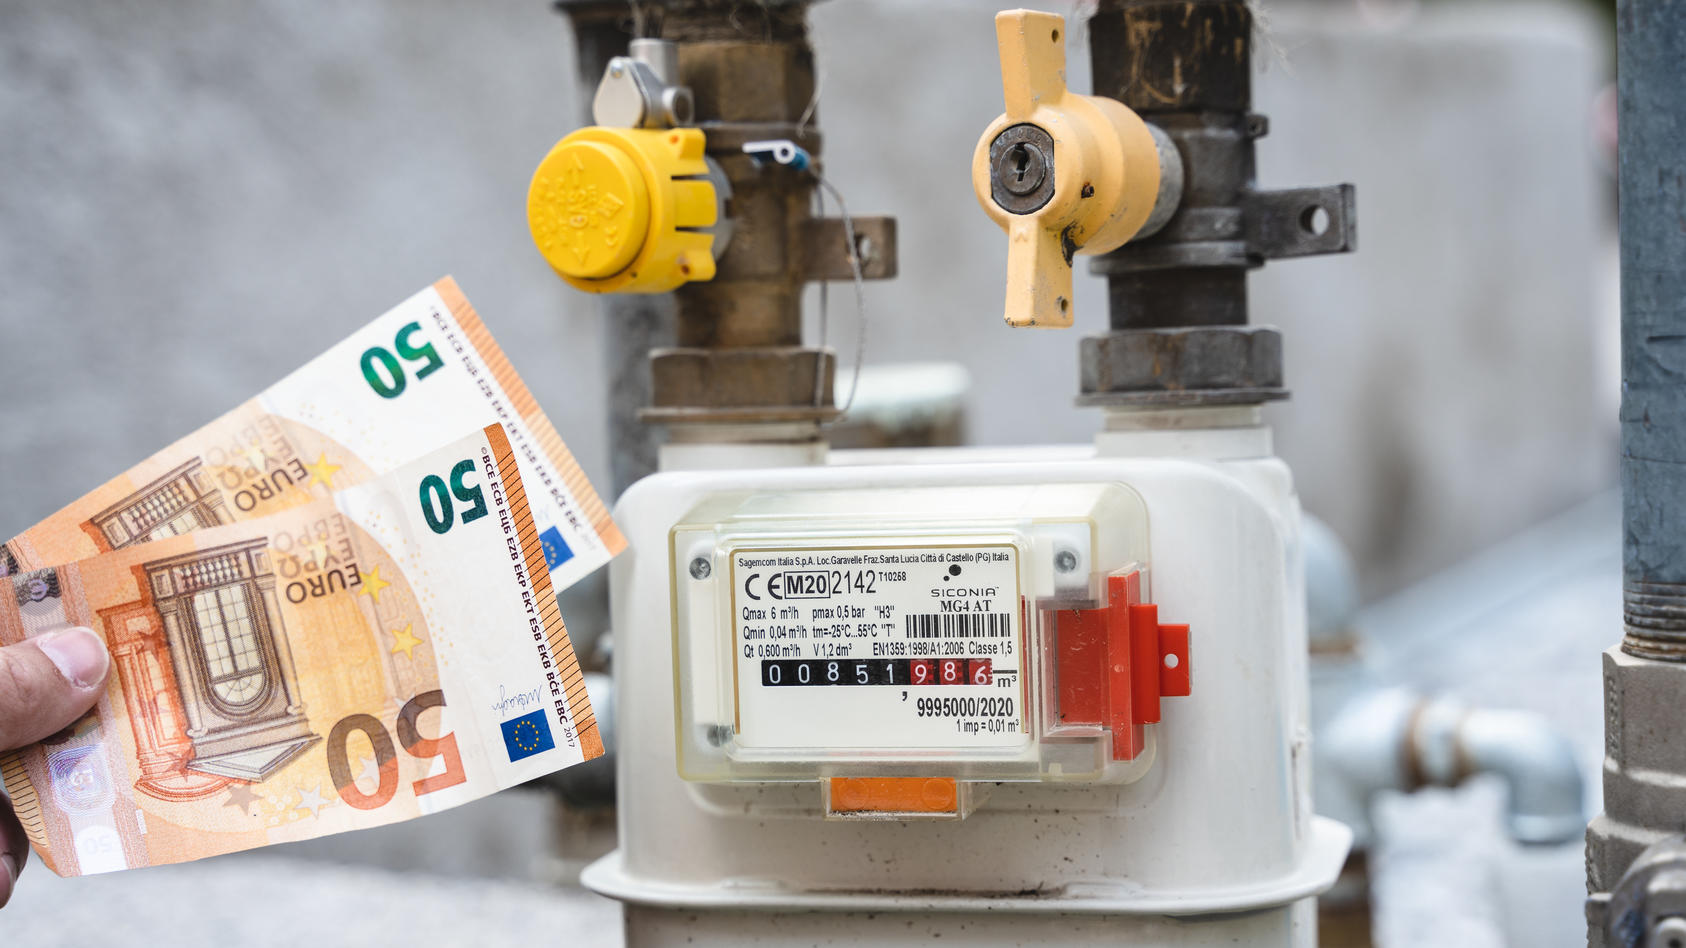 Riva, Trentino, Italy - 15 August 2022: Gas meter from a residential building outdoors. Male hand holding 50 euro bills in front of gas meter and pipe, symbolic image rising cost of electricity, gas and energy *** Gaszähler von einem Wohnhaus im Frei